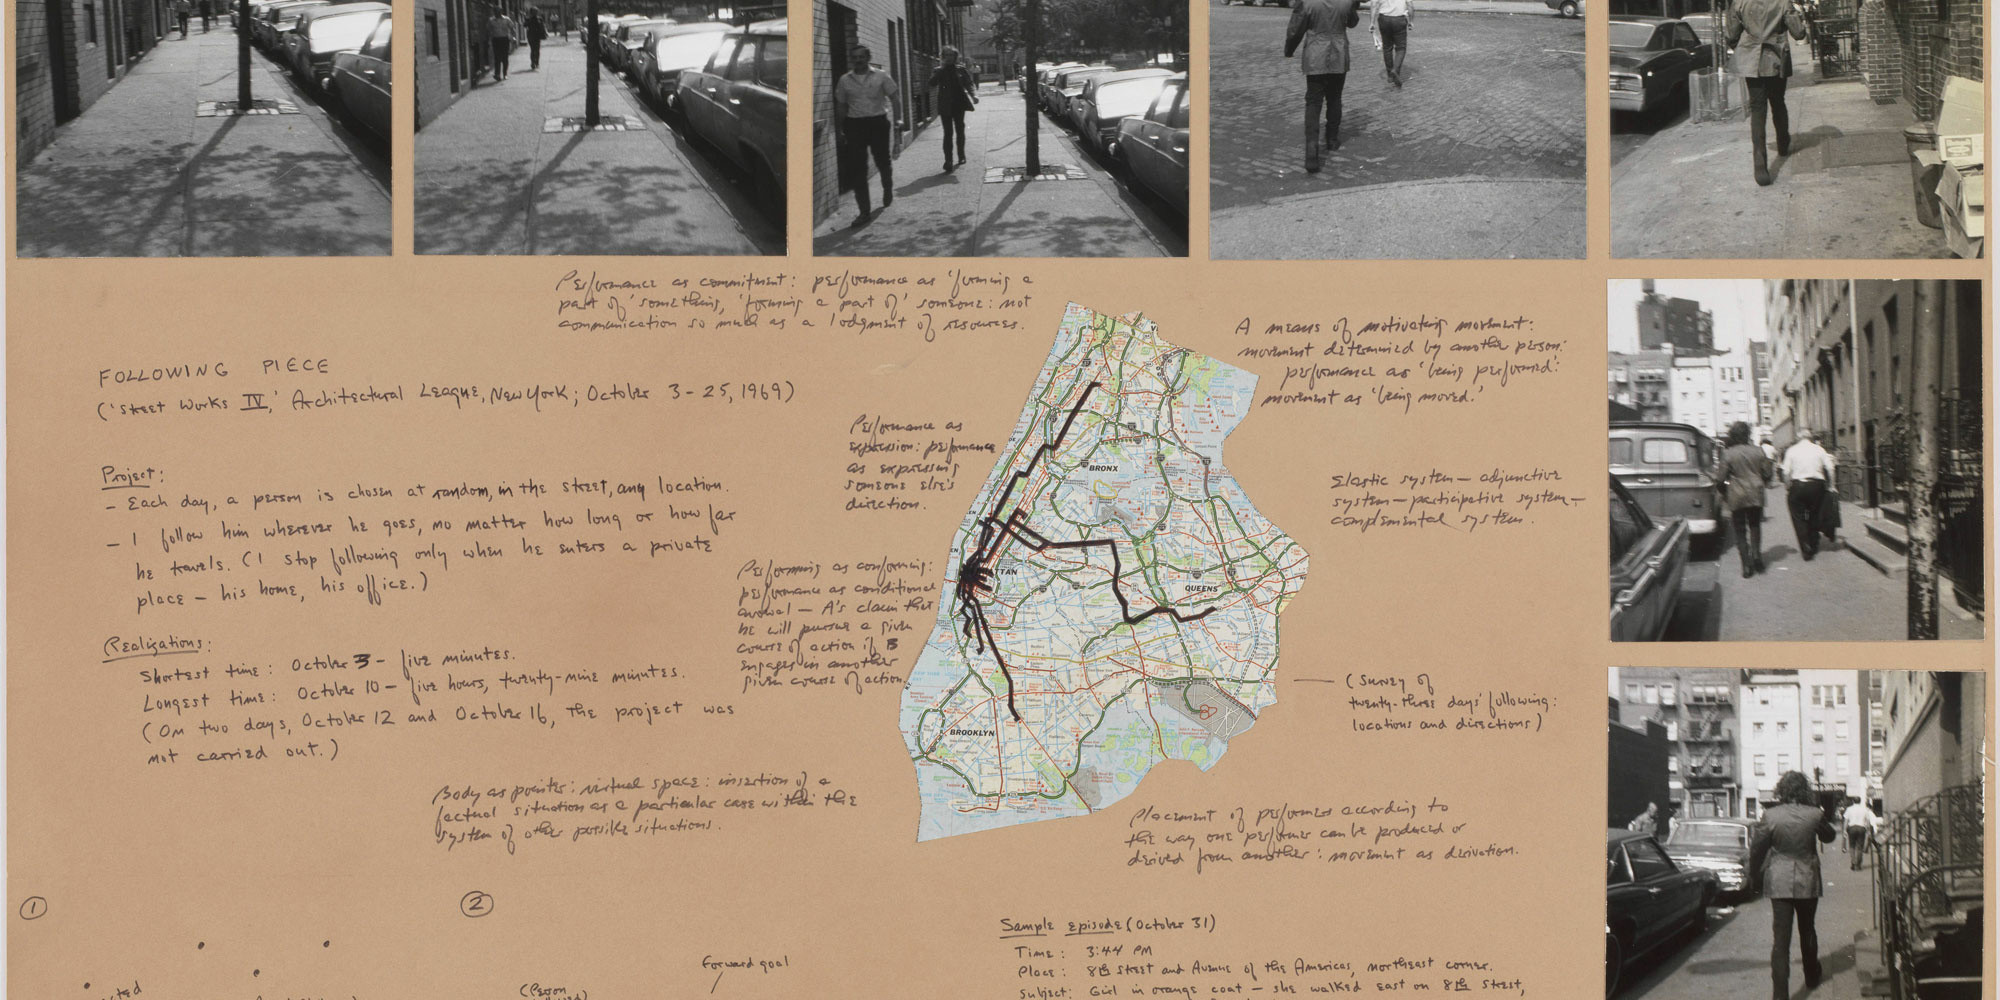 Vito Acconci. Following Piece. 1969. Gelatin silver prints, felt-tip pen, and map on board, frame: 33 15/16 × 43 11/16 × 1 1/4&#34; (86.2 × 111 × 3.1 cm) Image: 29 15/16 × 40 3/16&#34; (76 × 102 cm). The Museum of Modern Art, New York. Partial gift of the Daled Collection and partial purchase through the generosity of Maja Oeri and Hans Bodenmann, Sue and Edgar Wachenheim III, Agnes Gund, Marlene Hess and James D. Zirin, Marie- Josée and Henry R. Kravis, and Jerry I. Speyer and Katherine G. Farley. © 2021 Vito Acconci